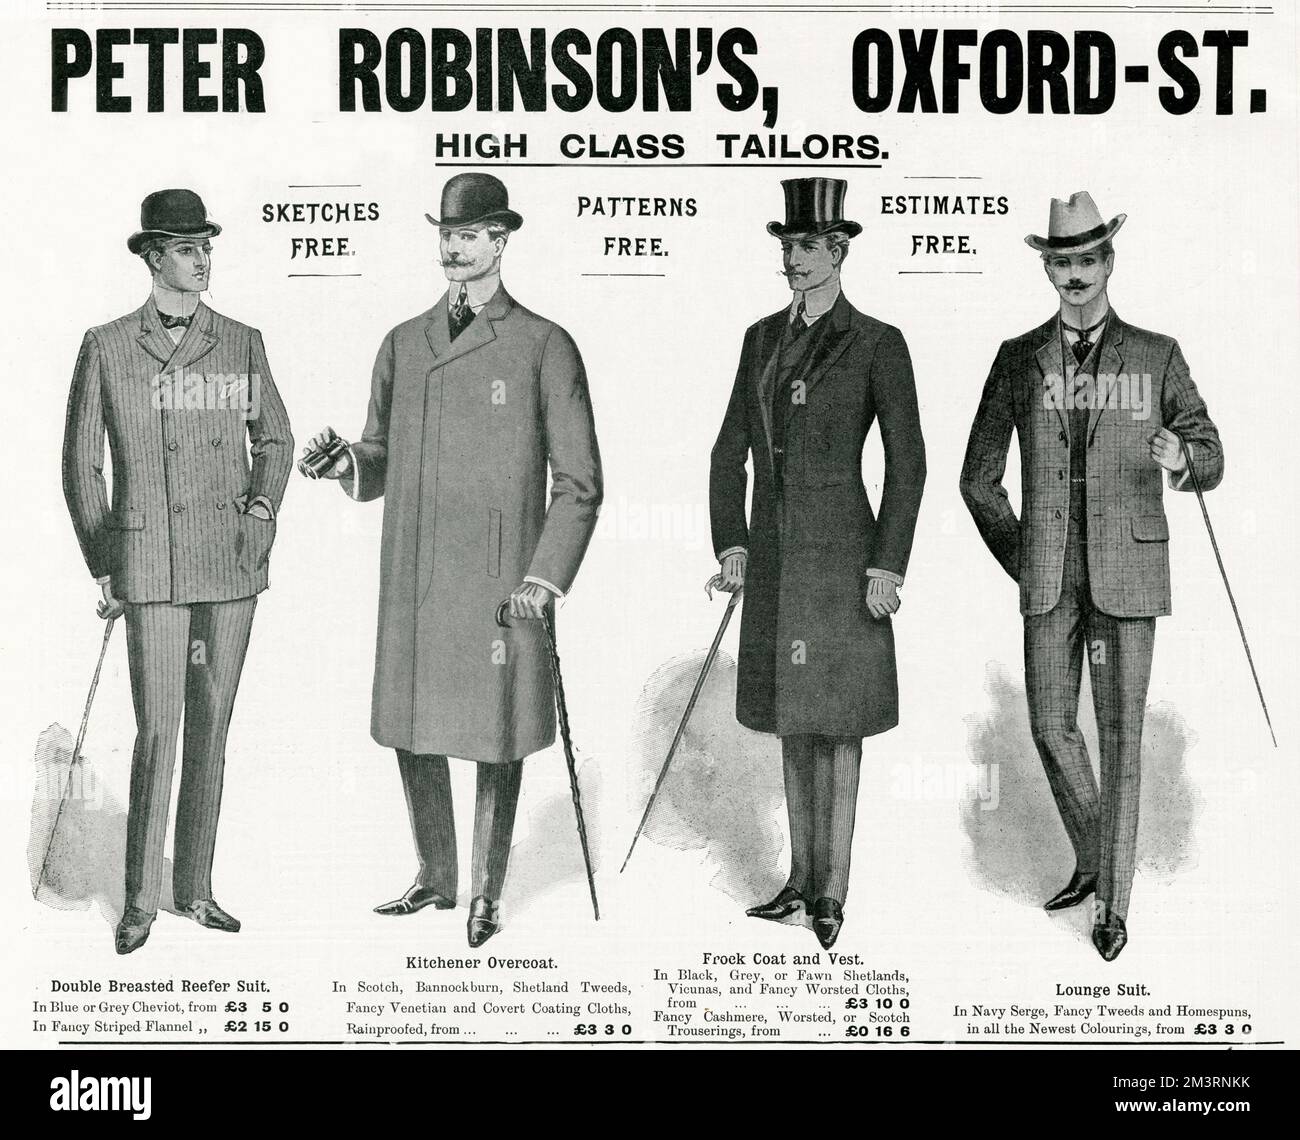 Tailored clothing for gentlemen at Peter Robinson's, Oxford Street. Stock Photo